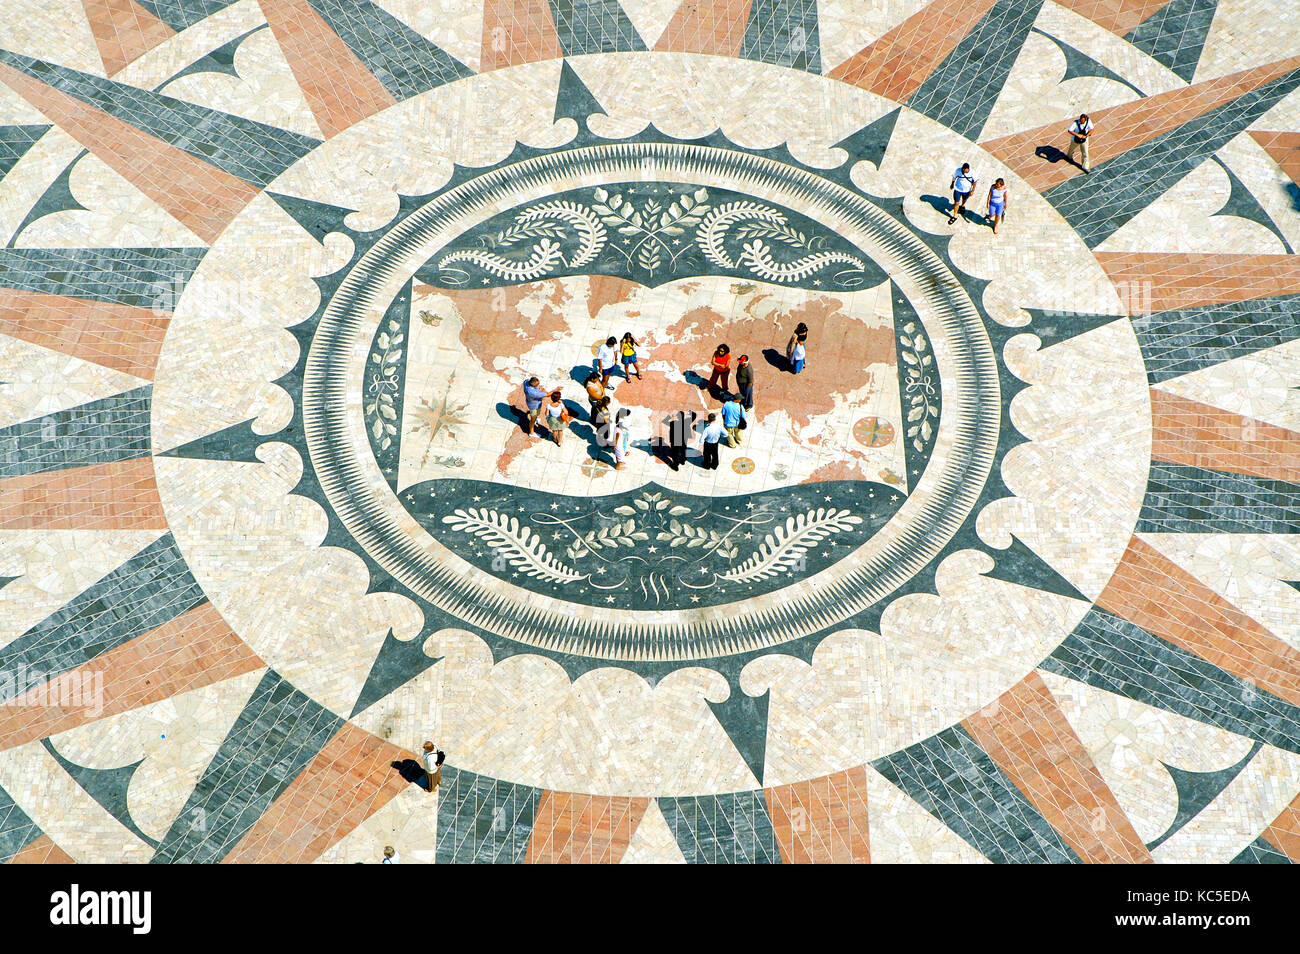 A group of tourists stand in the centre of the compass pavement in front of the Monument to the Discoveries, Lisbon, Portugal Stock Photo